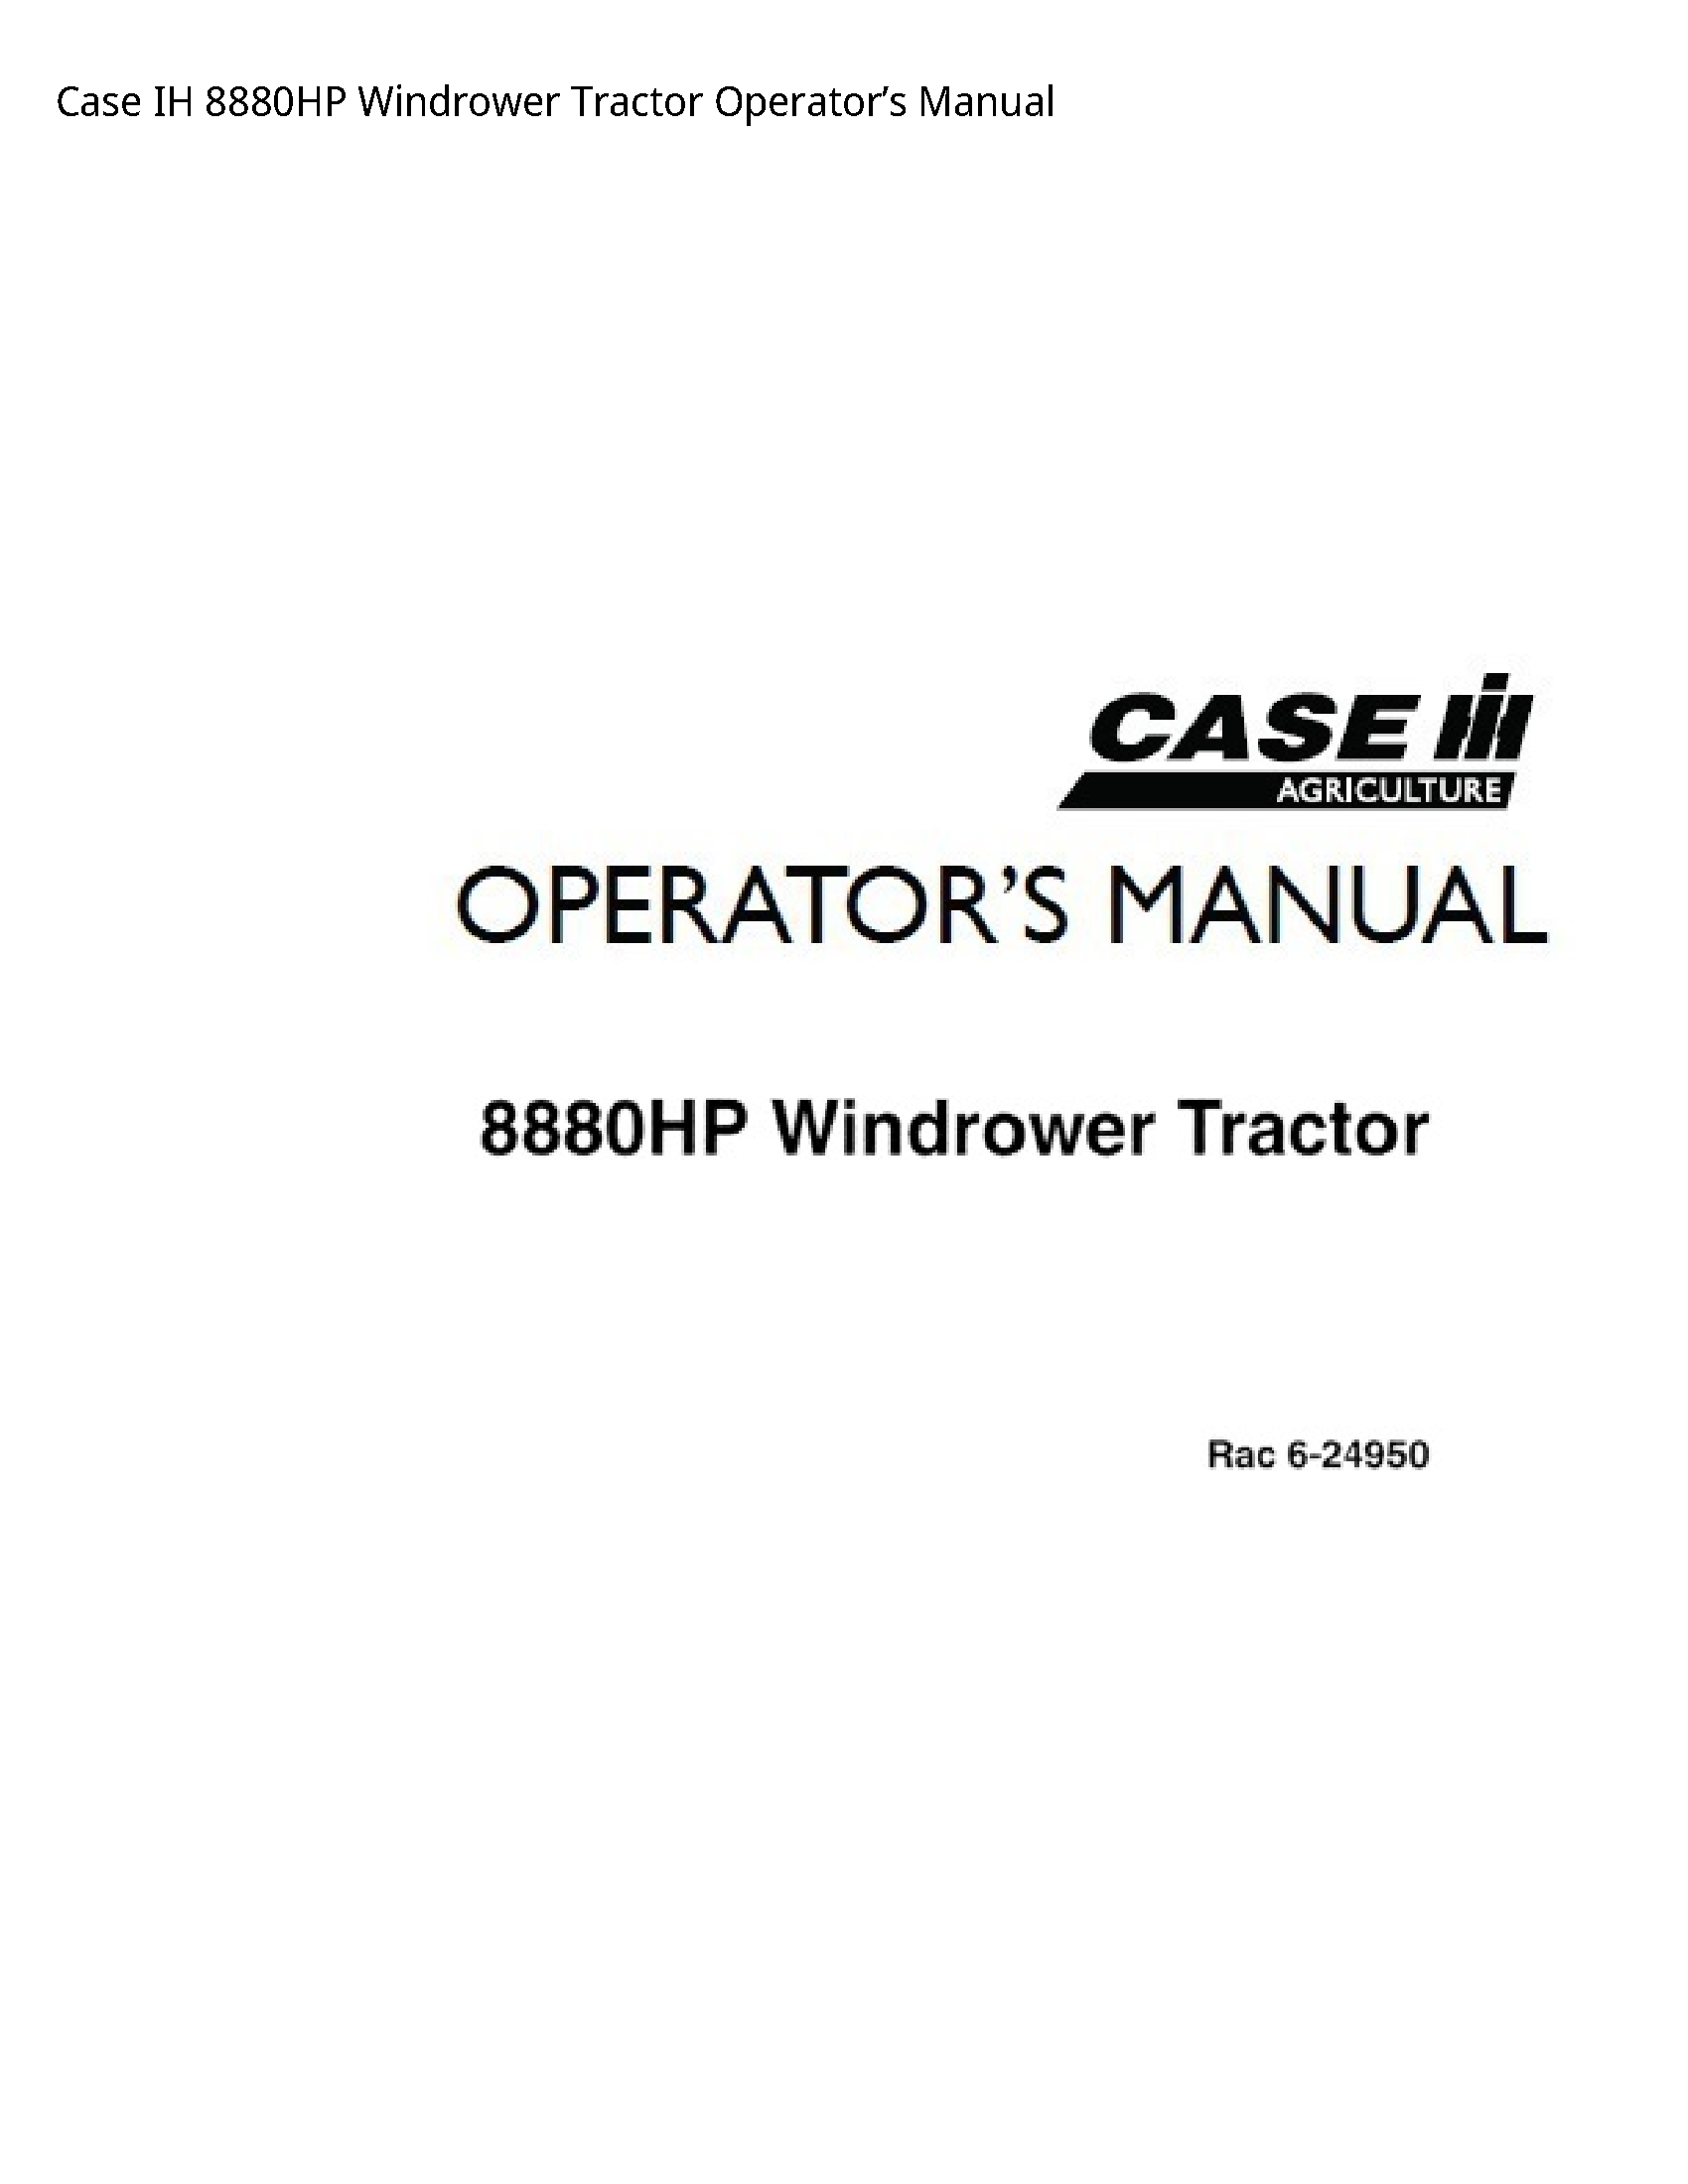 Case/Case IH 8880HP IH Windrower Tractor Operator’s manual